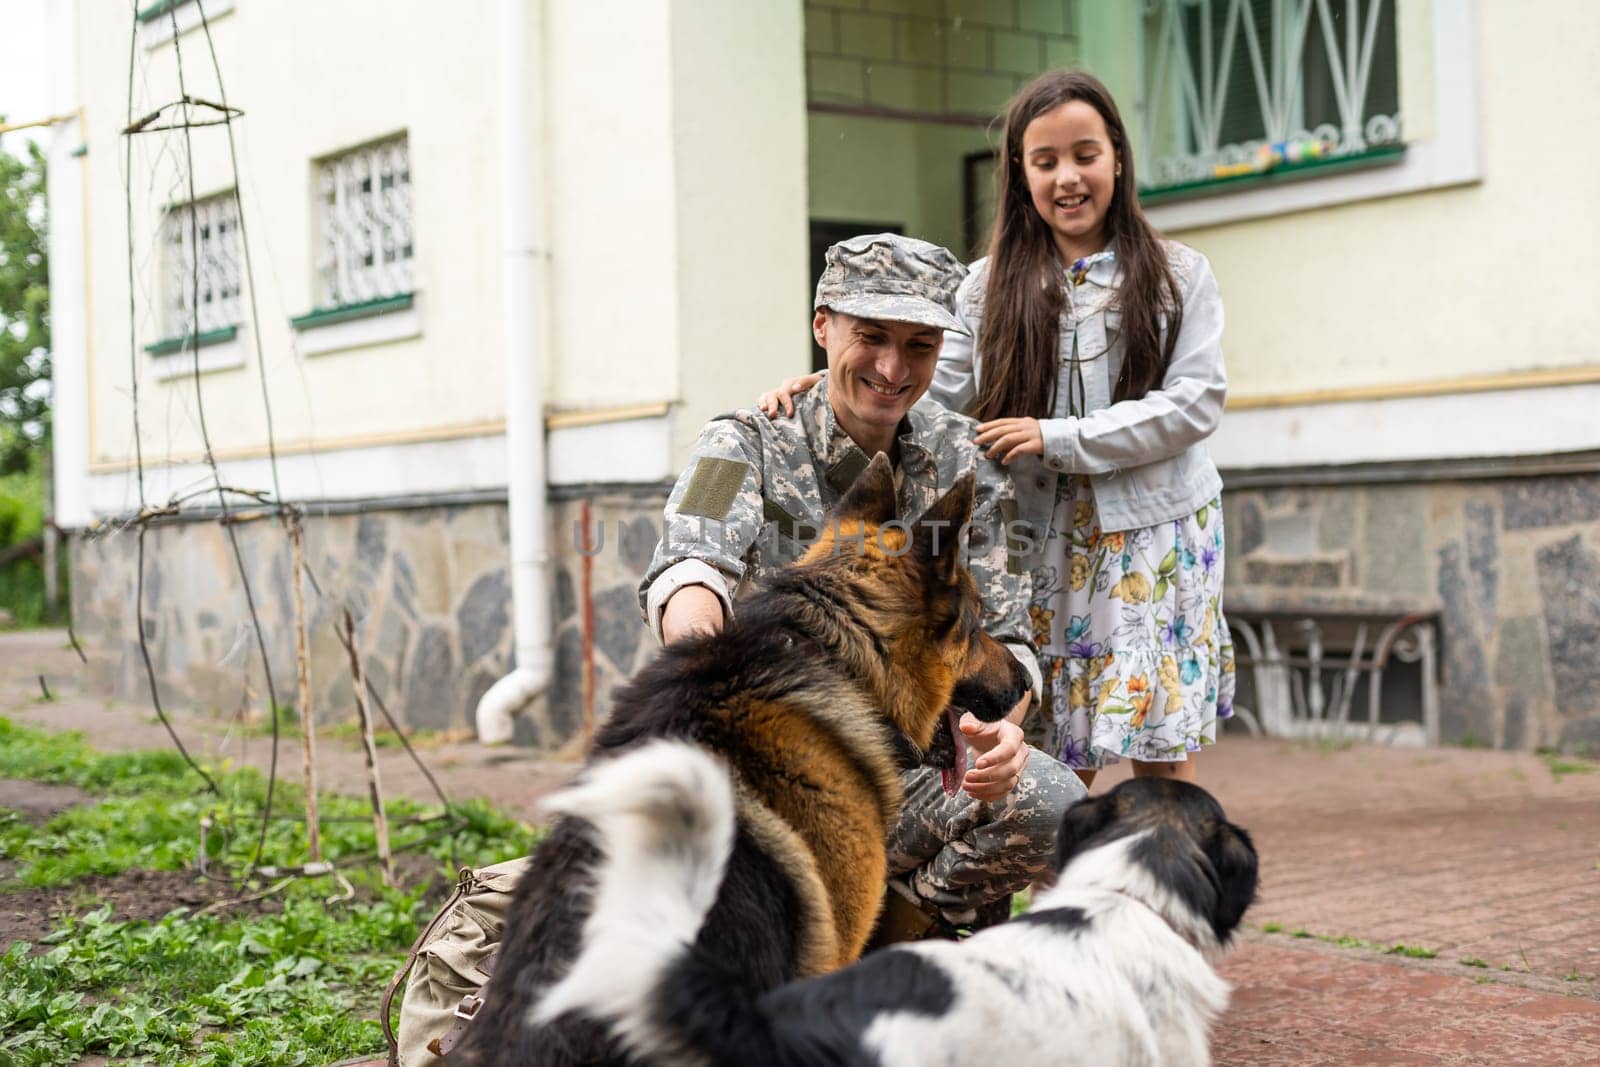 military father meeting with daughter and dogs by Andelov13